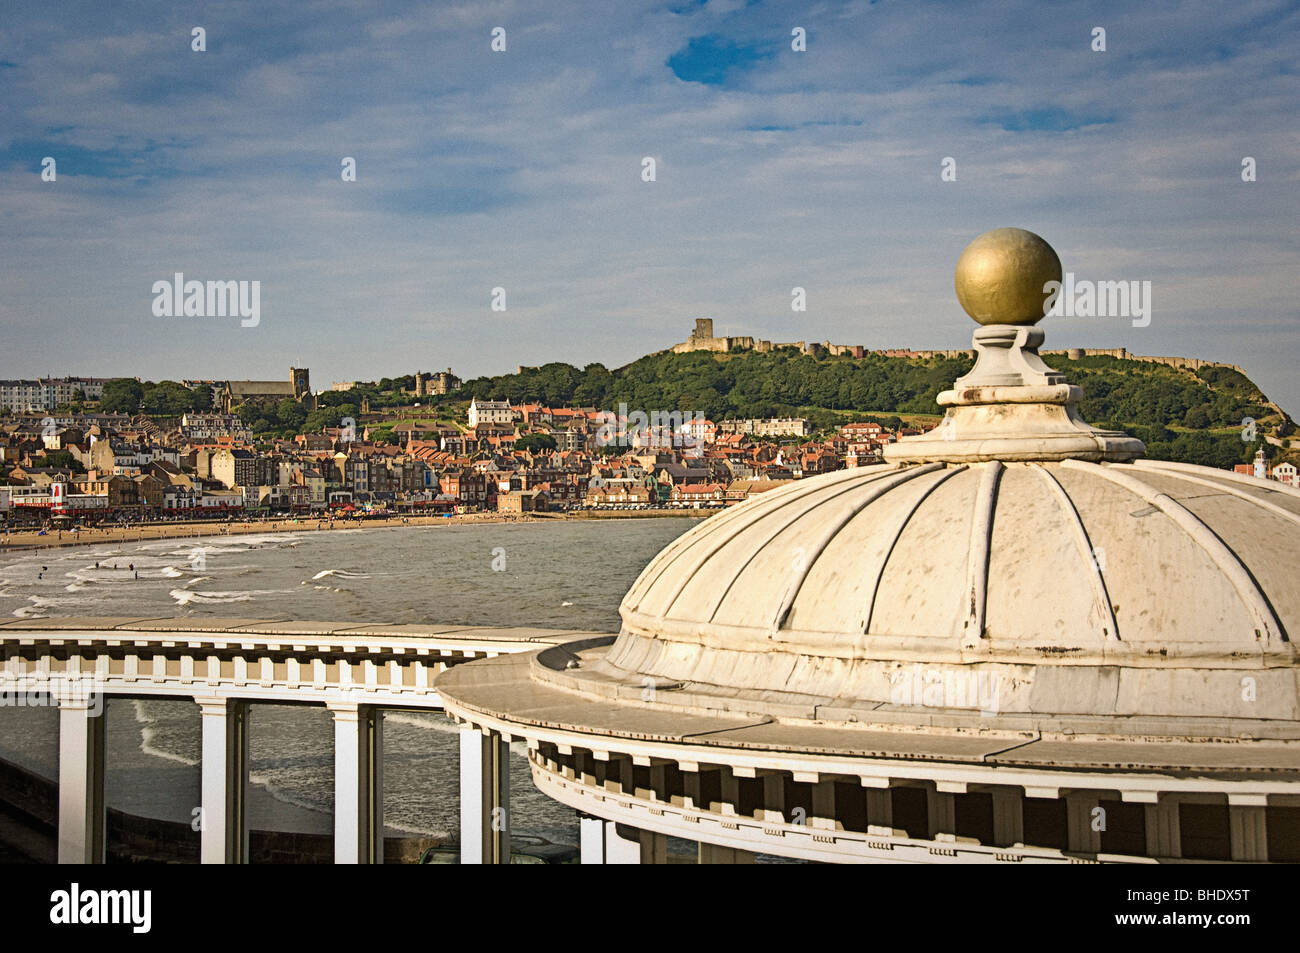 Ornate roof of the bandstand at The Spa with  Scarborough in the background Stock Photo